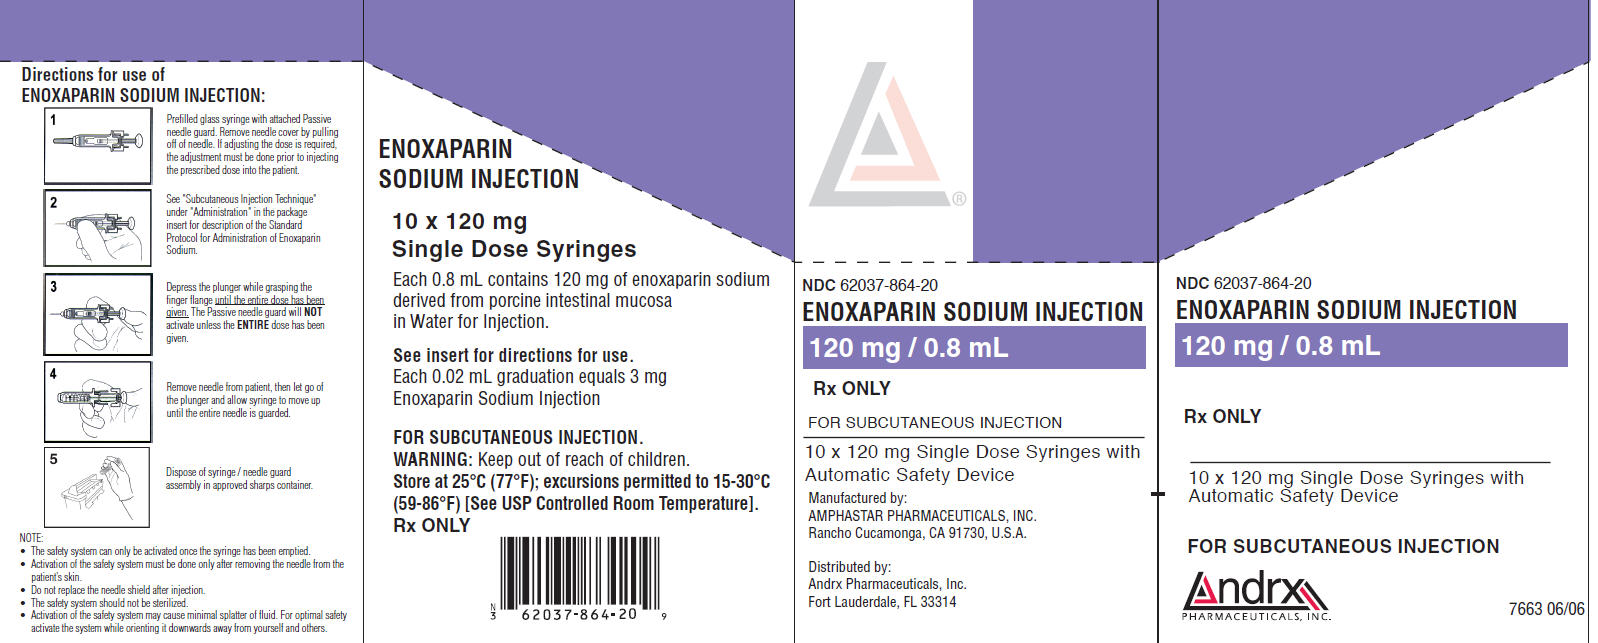 NDC 62037-864-20 ENOXAPARIN SODIUM INJECTION 120 mg/0.8 mL Rx ONLY FOR SUBCUTANEOUS INJECTION 10 x 120 mg Single Dose Syringes with Automatic Safety Device